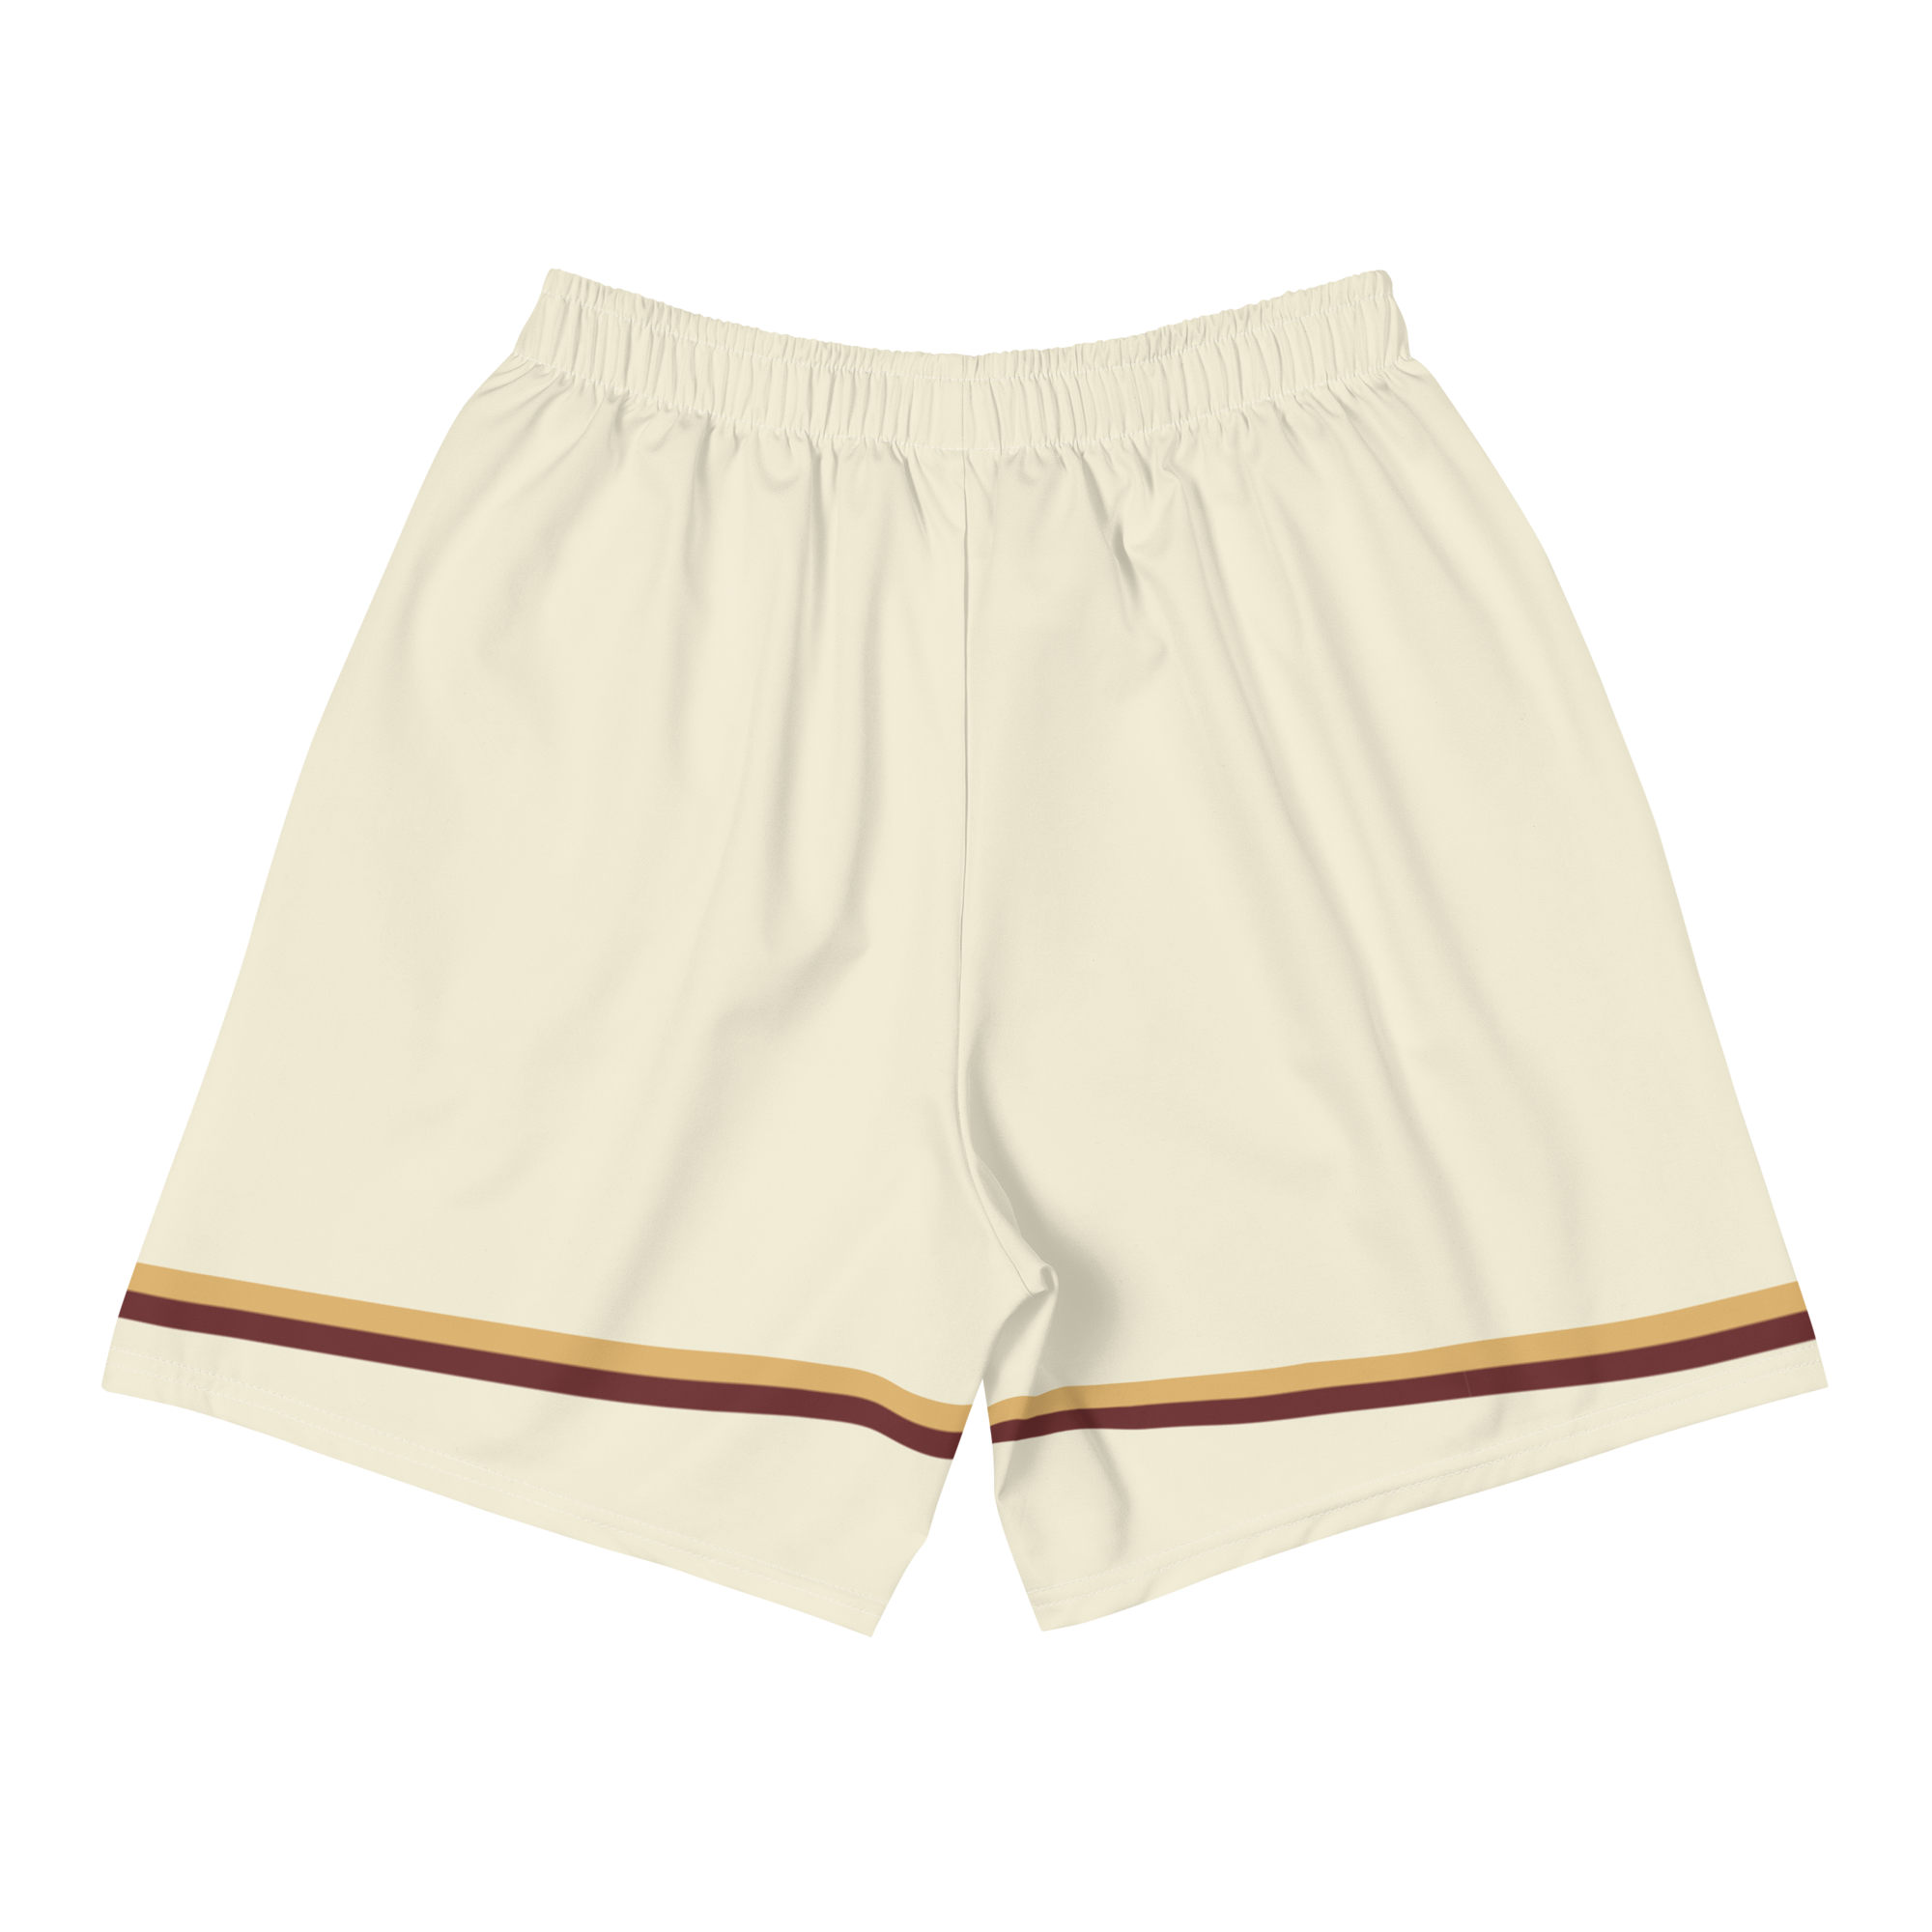 Retro Gold - Men's Recycled Athletic Shorts